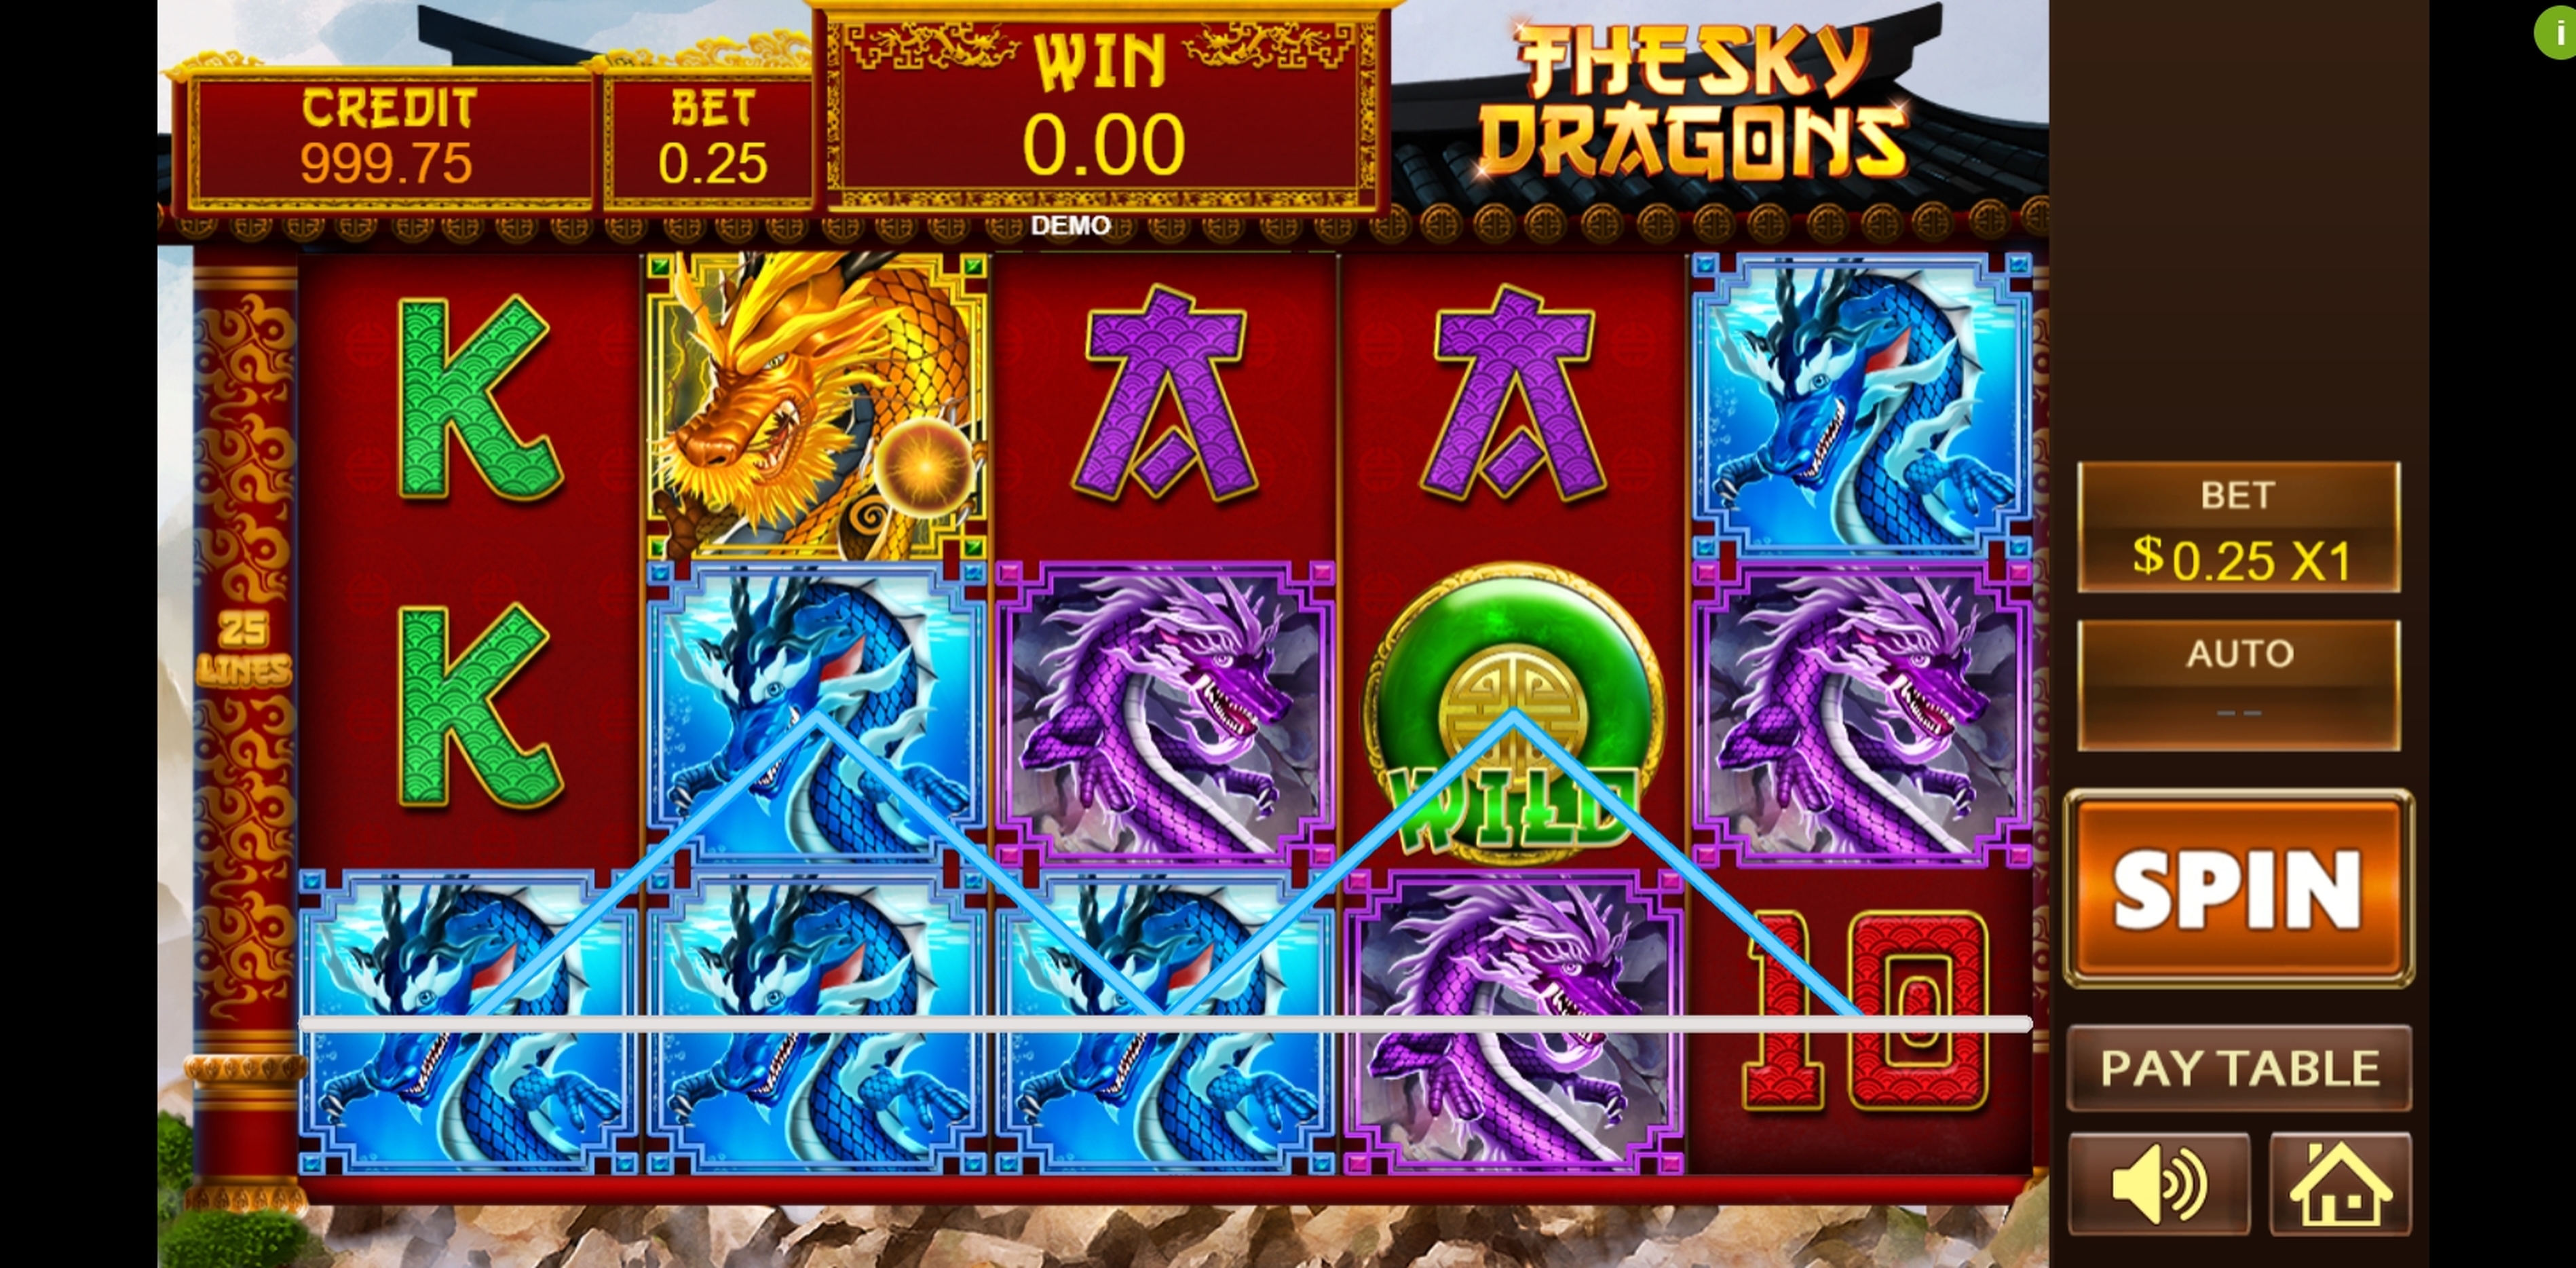 Win Money in The Sky Dragons Free Slot Game by PlayStar